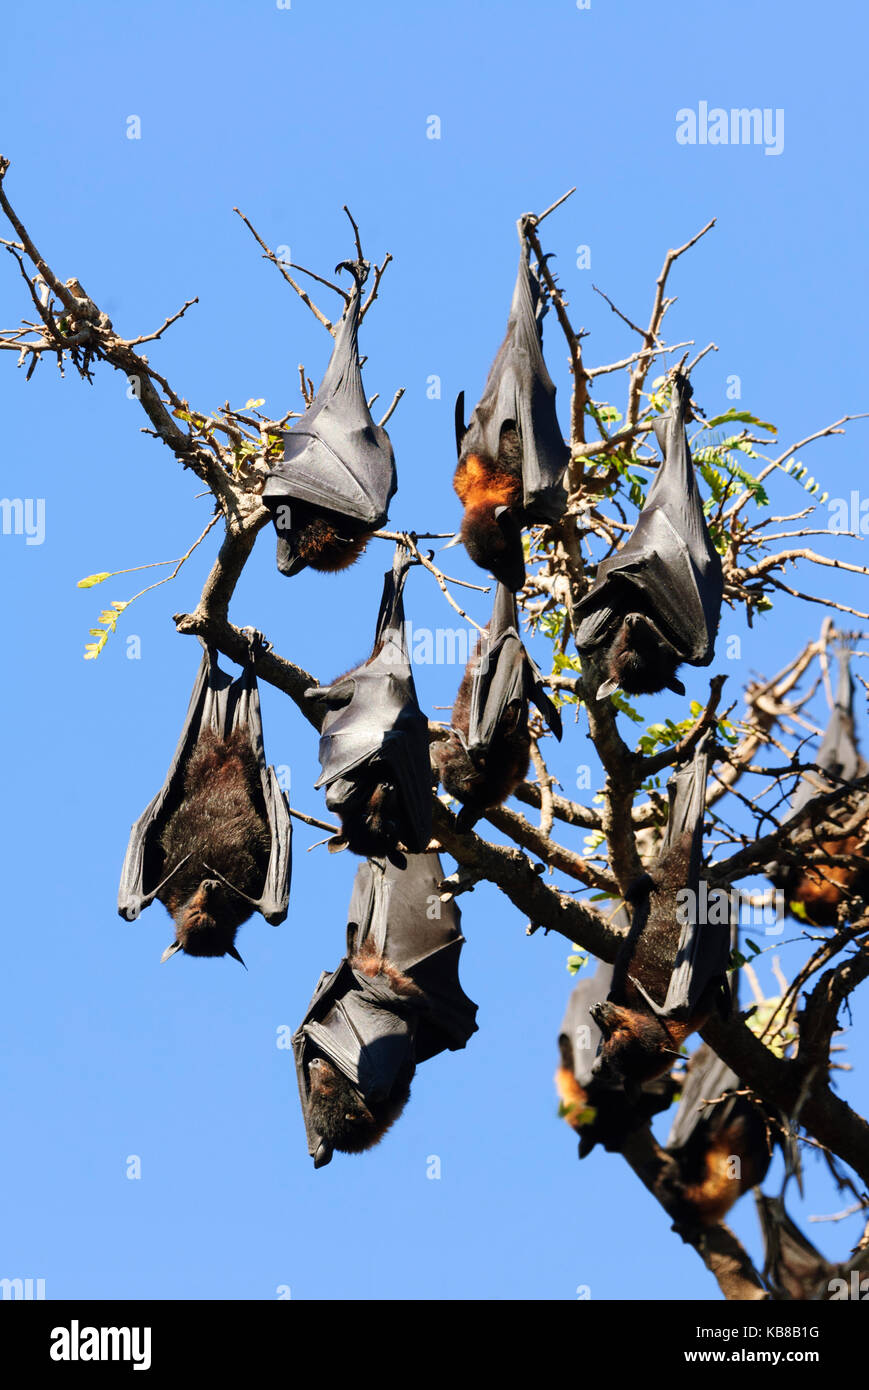 A colony of Black Flying Foxes (Pteropus alecto) roosting in Lissner Park in Charters Towers. They are a pest and a health hazard there. Queensland, Q Stock Photo